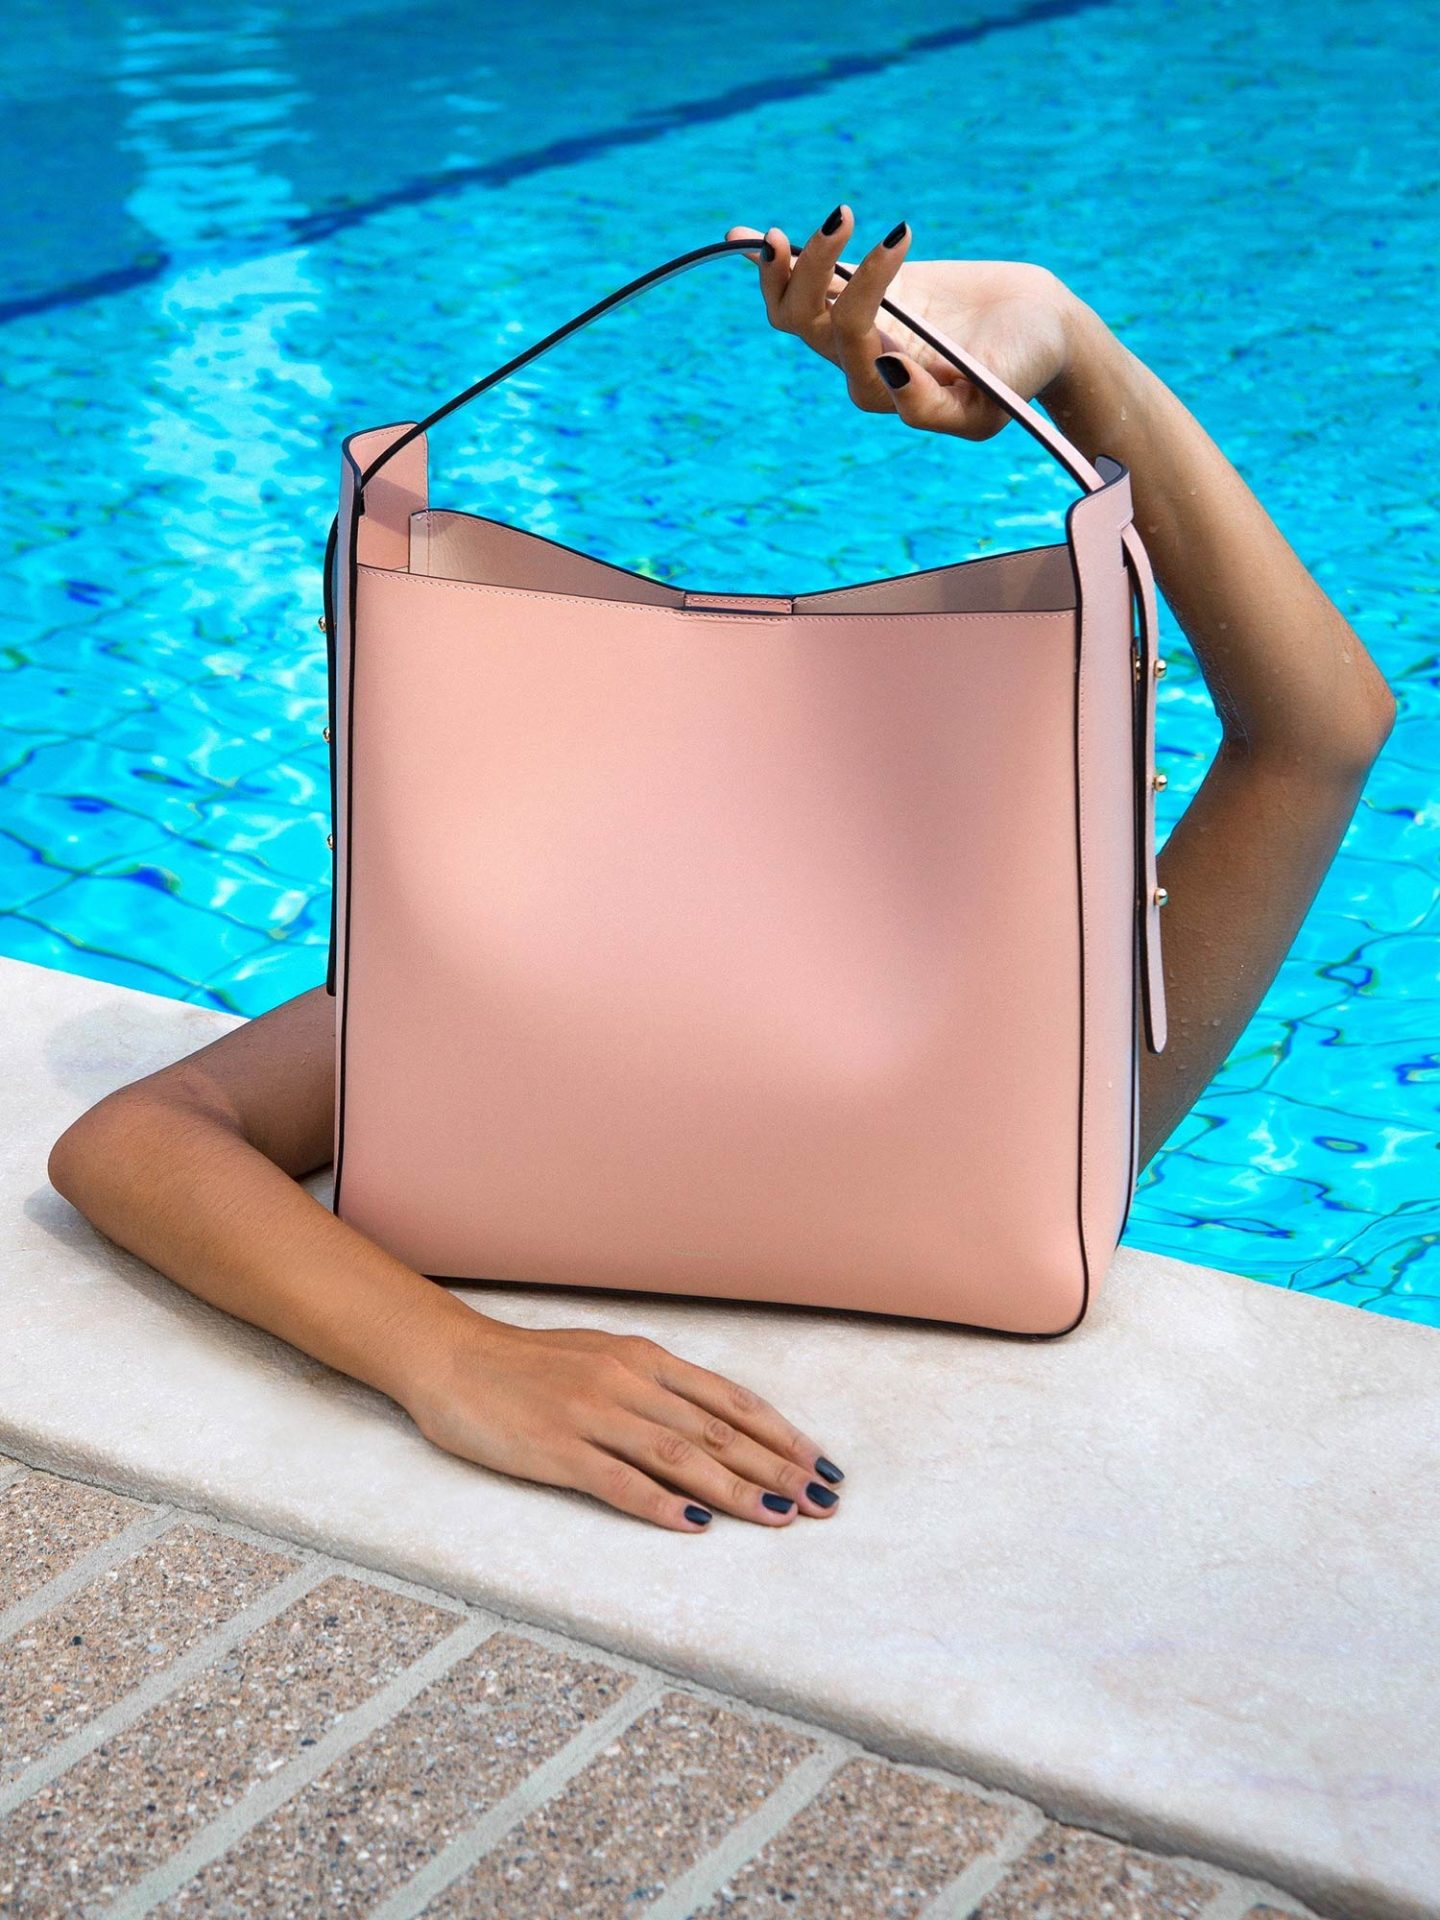 Wandler's Debut Bag Collection Inspired By Abstract Modernist Art - IGNANT